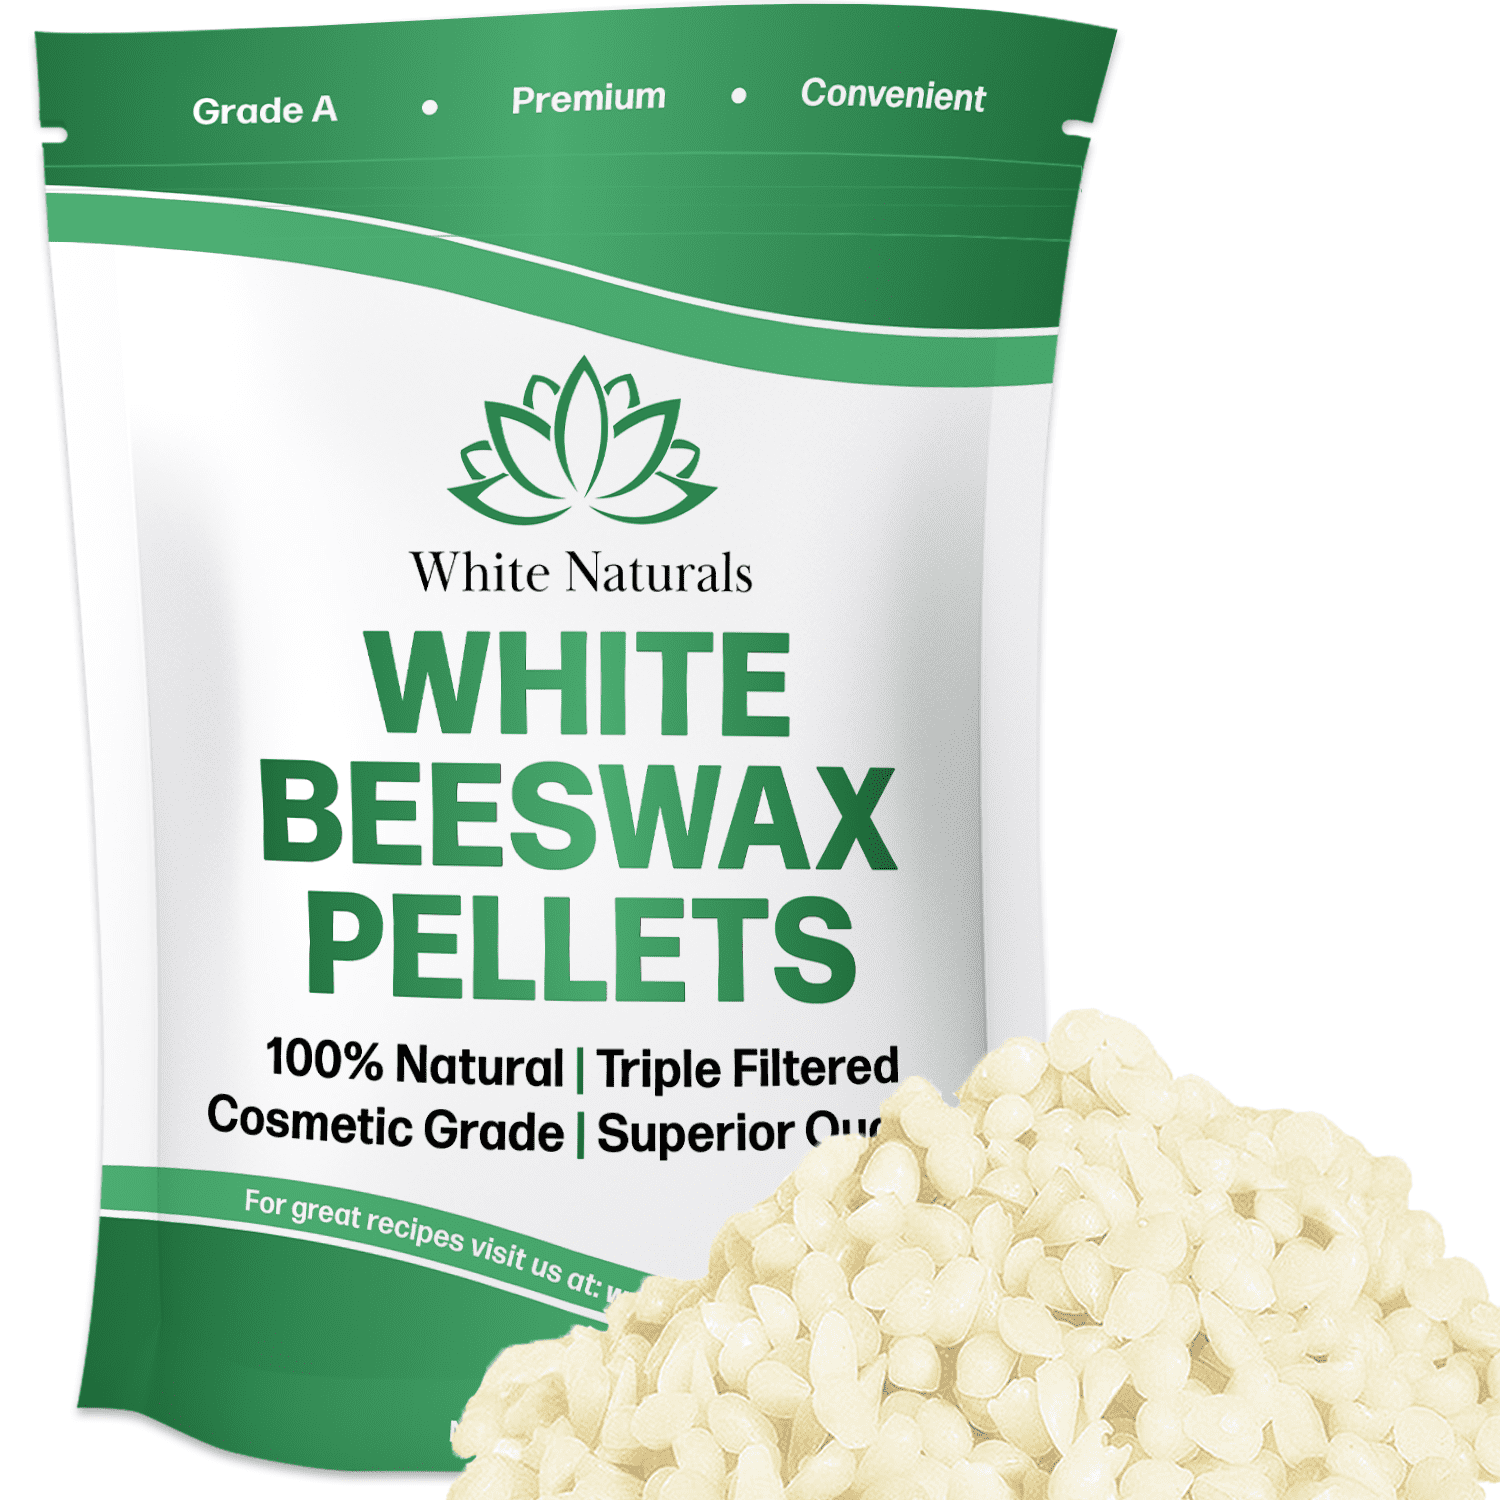 PURIME Organic Beeswax Pellets 1LB, USDA Certified Pure White for Candle  and Lotion Making, Food Grade Beeswax for Candle Making, Beeswax Pastilles  organic, Bees Wax melts for Lotion - Yahoo Shopping